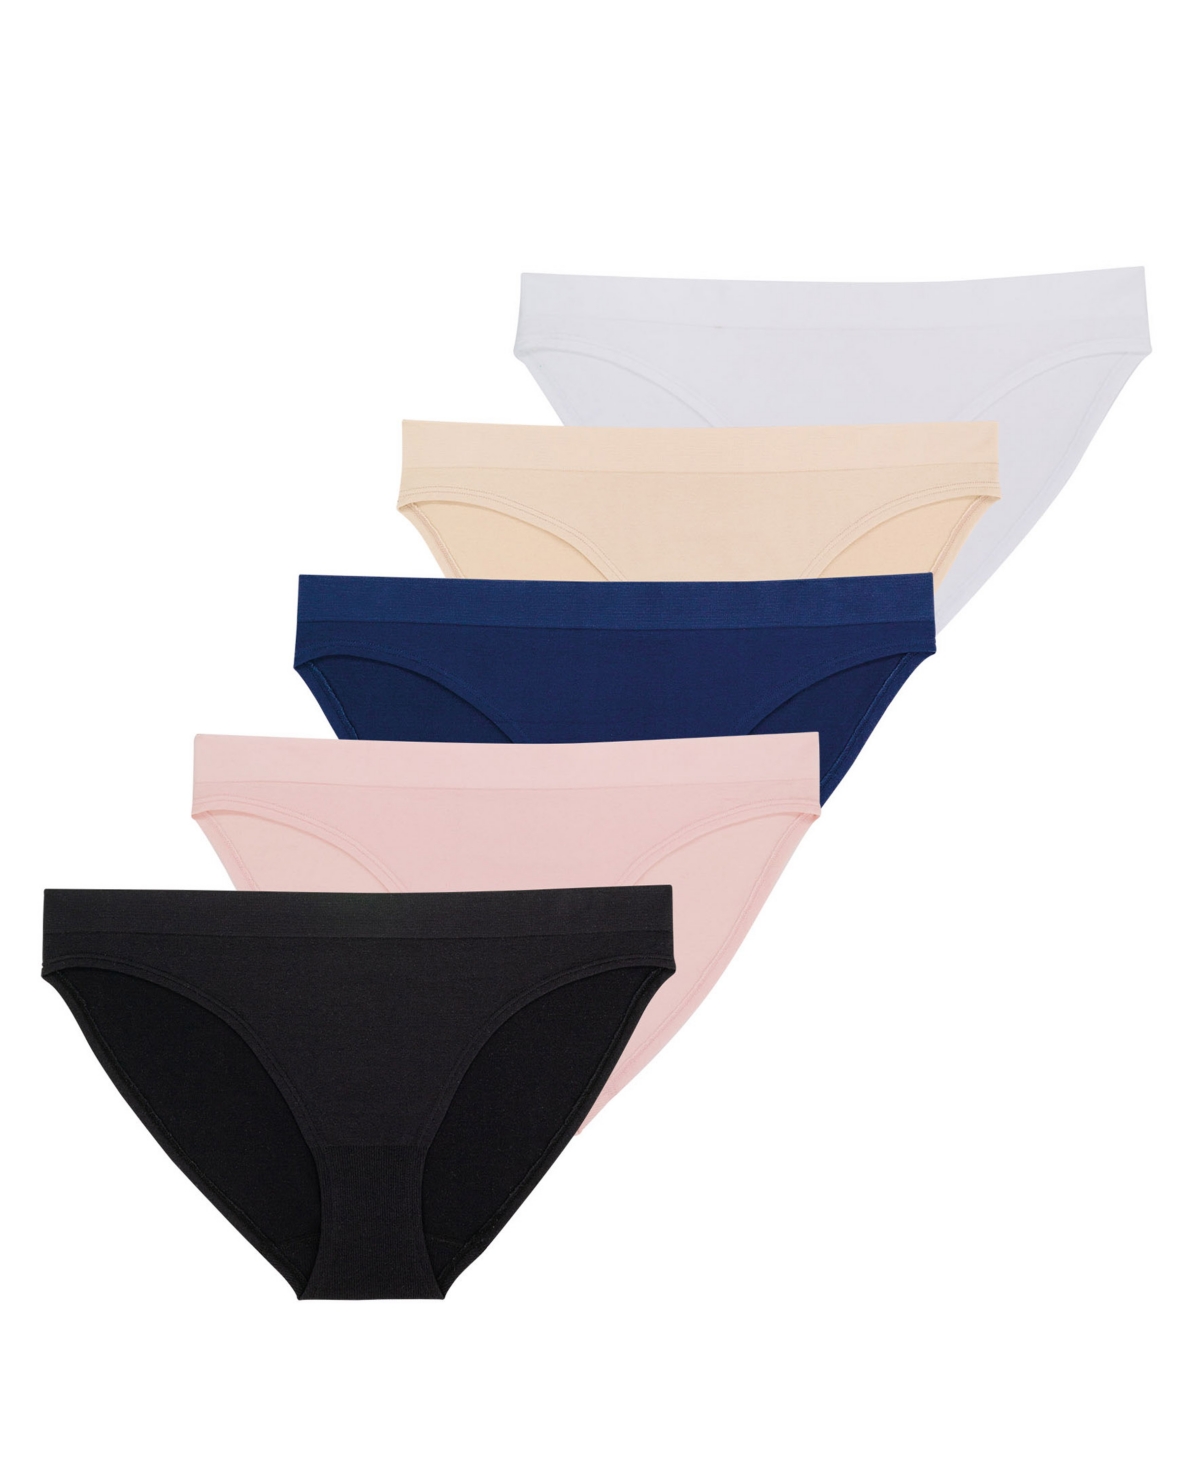 Dorina Women's Rosanne 5 Pack Seamless Soft Touch Fabric Brief Panties In Black,pink,blue,nude,white